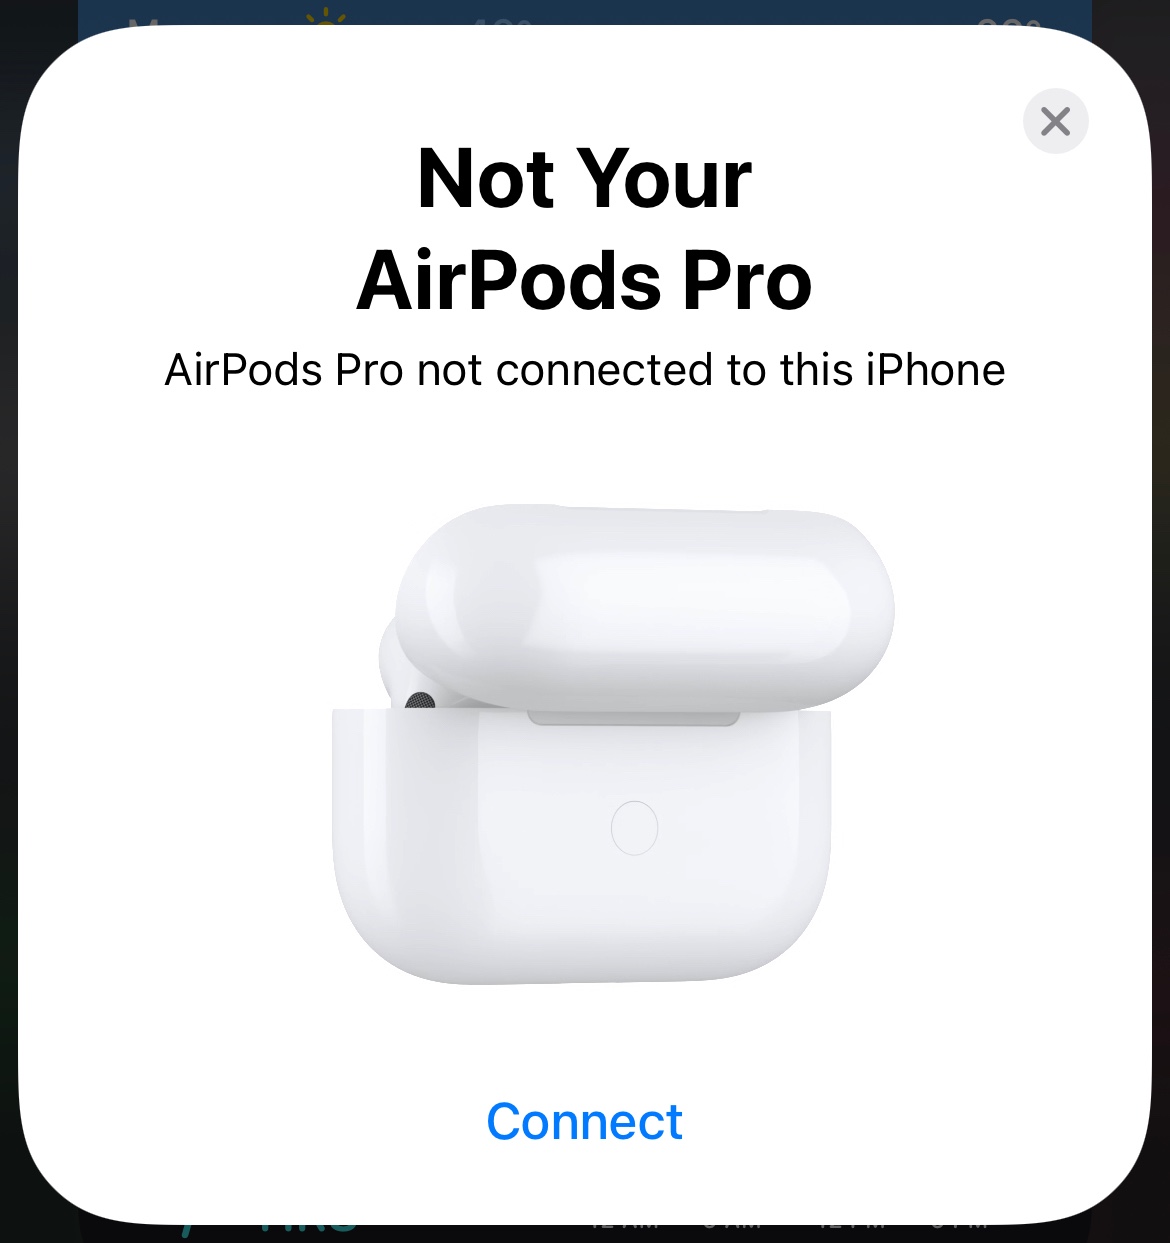 sprede arkitekt niveau AirPod pros disconnect and saying “not yo… - Apple Community